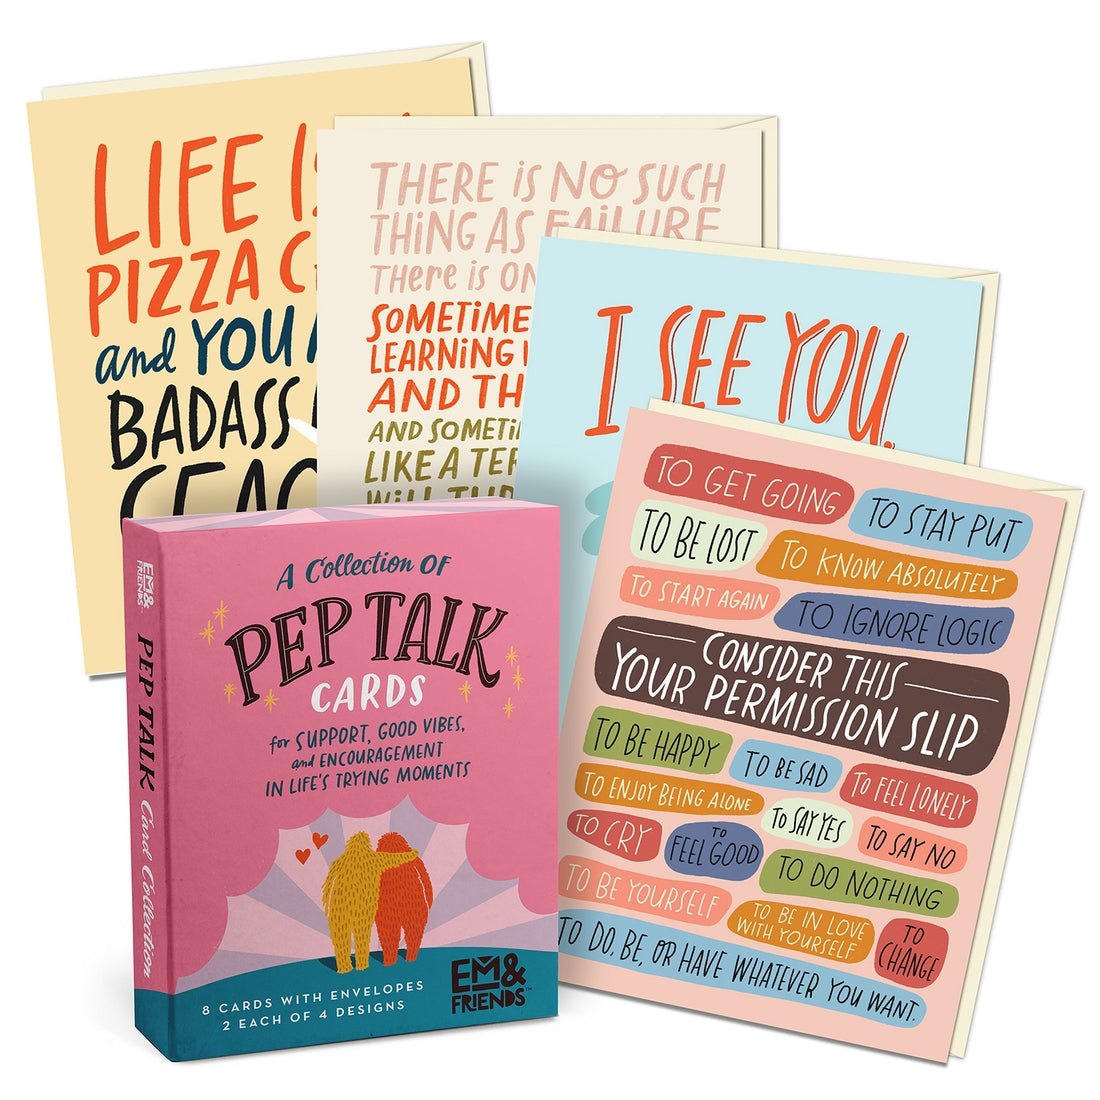 Snapshot of the cards (overlapping each other) included in the pep talk greeting card collection